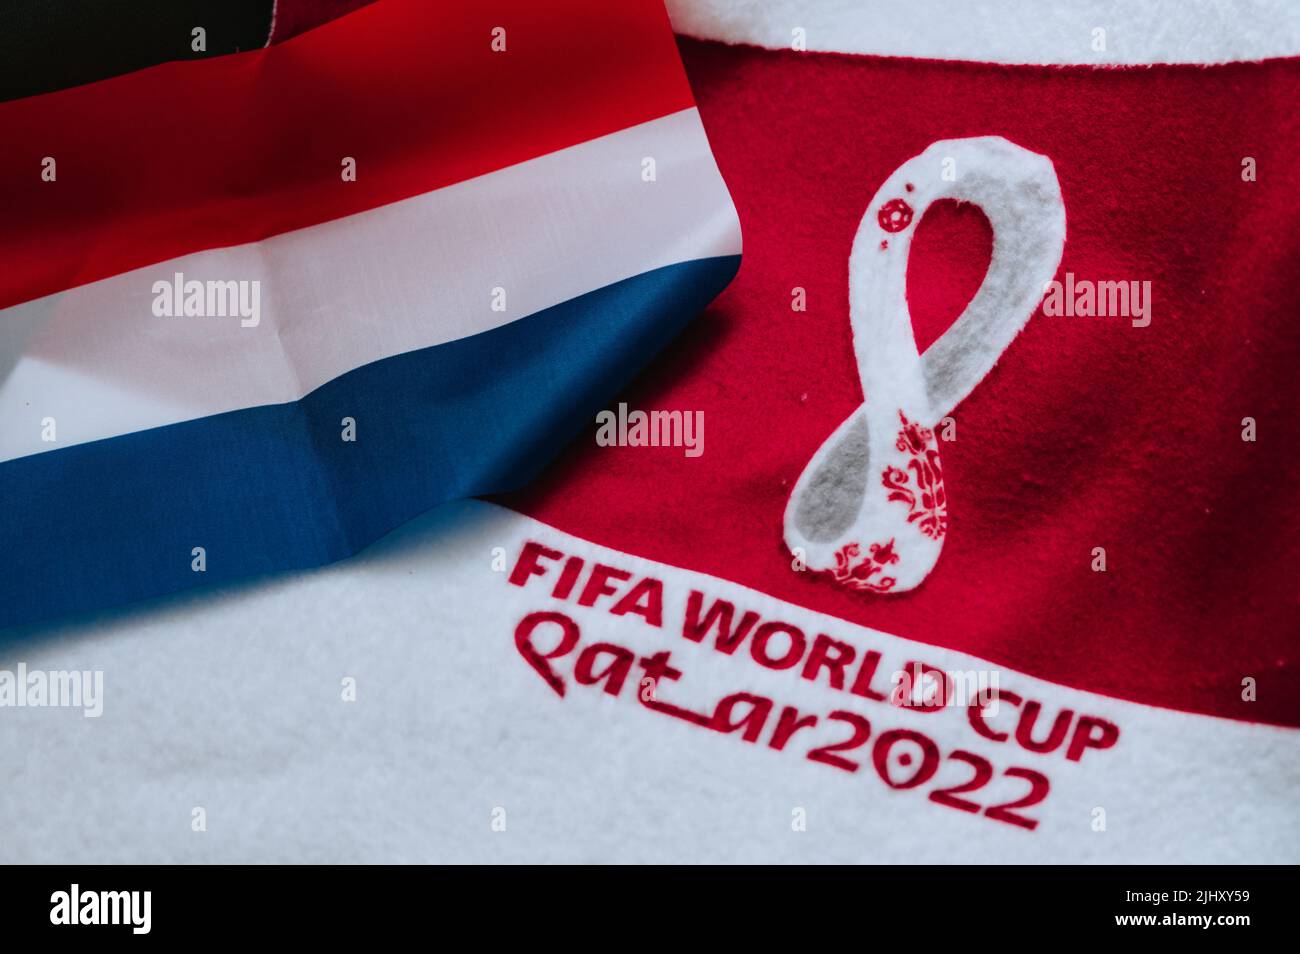 QATAR, DOHA, 18 JULY, 2022: Netherlands National flag and logo of FIFA World Cup in Qatar 2022 on red carpet. Soccer sport background, edit space. Qat Stock Photo